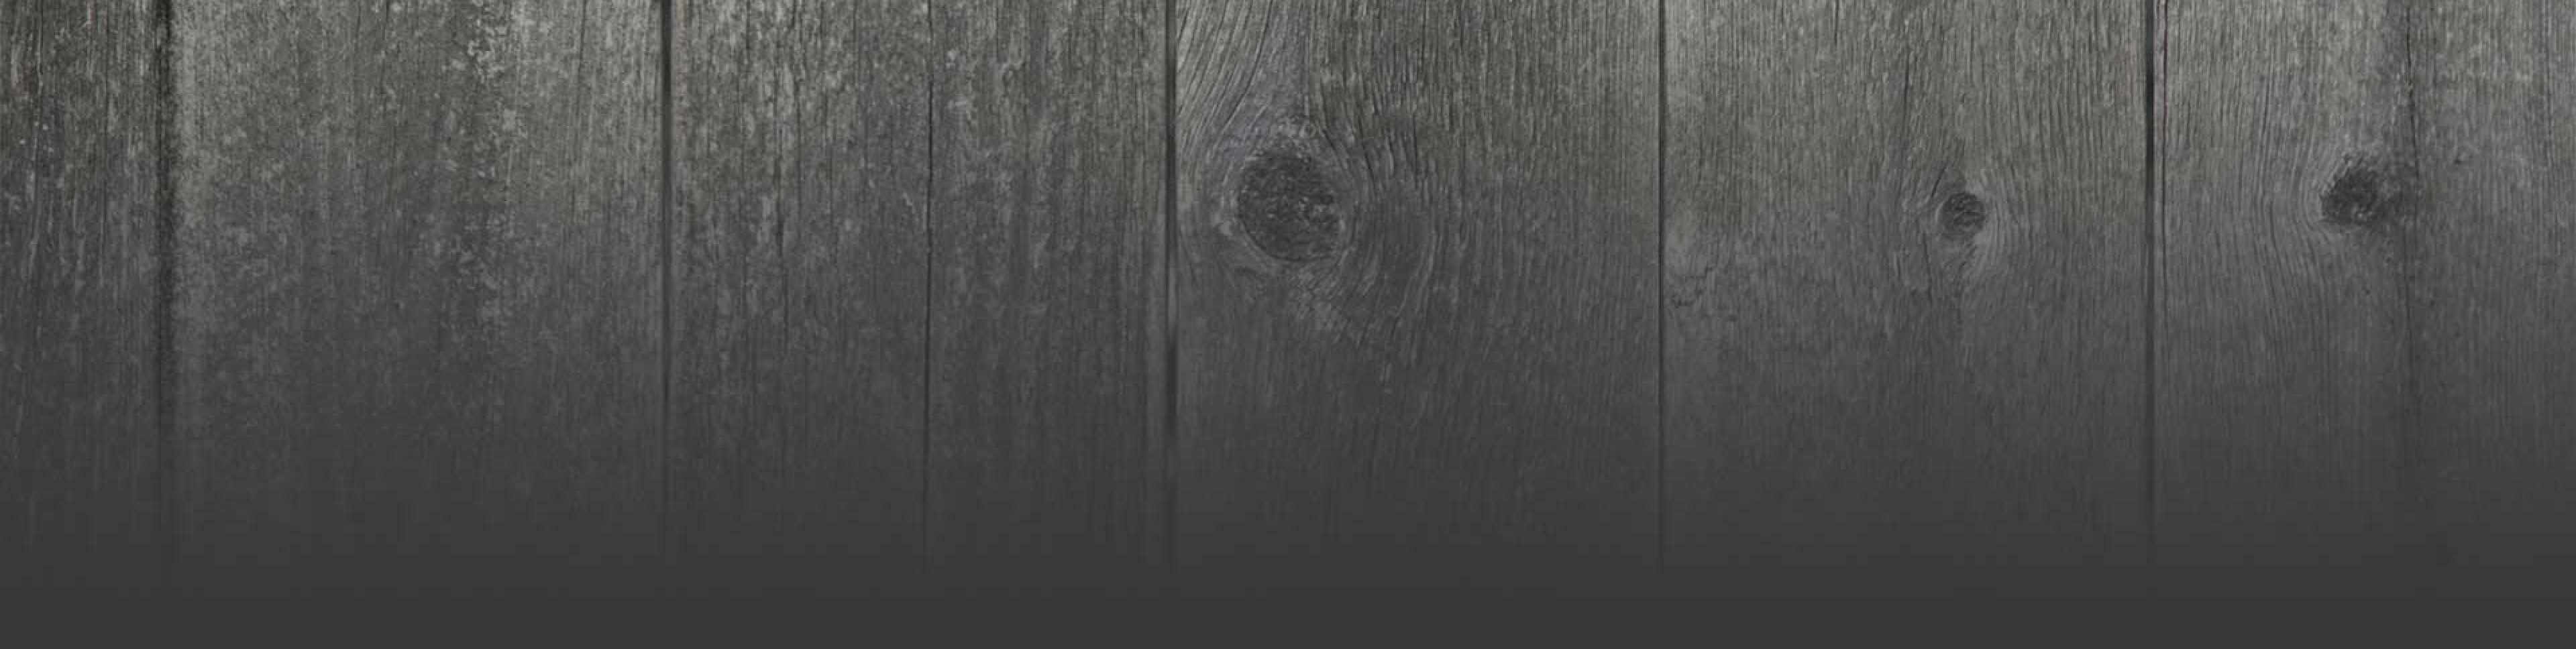 wood grain background fading to gray